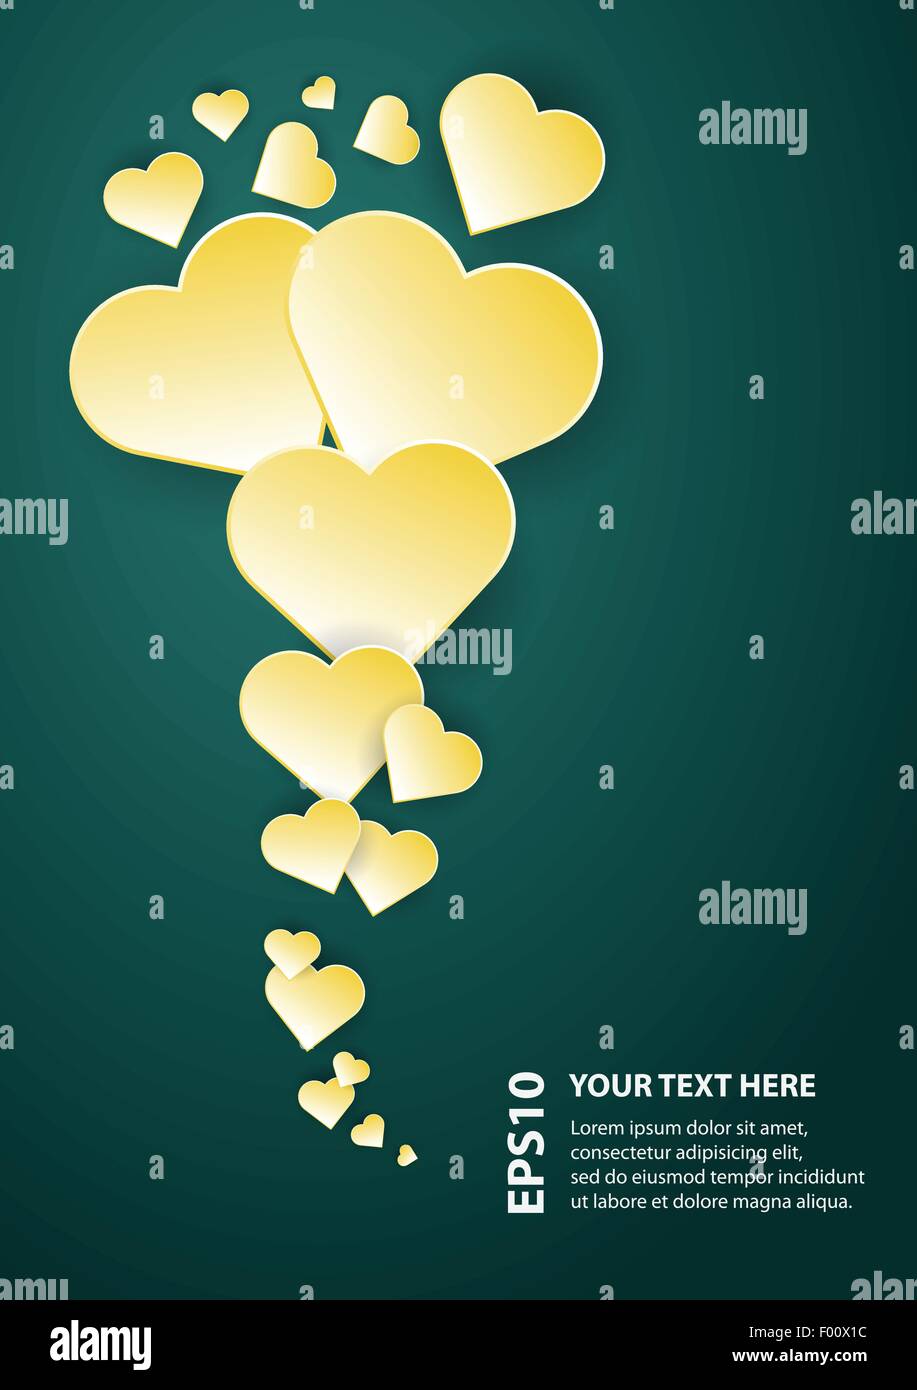 Abstract flying yellow hearts vector background template with place for text. Stock Vector